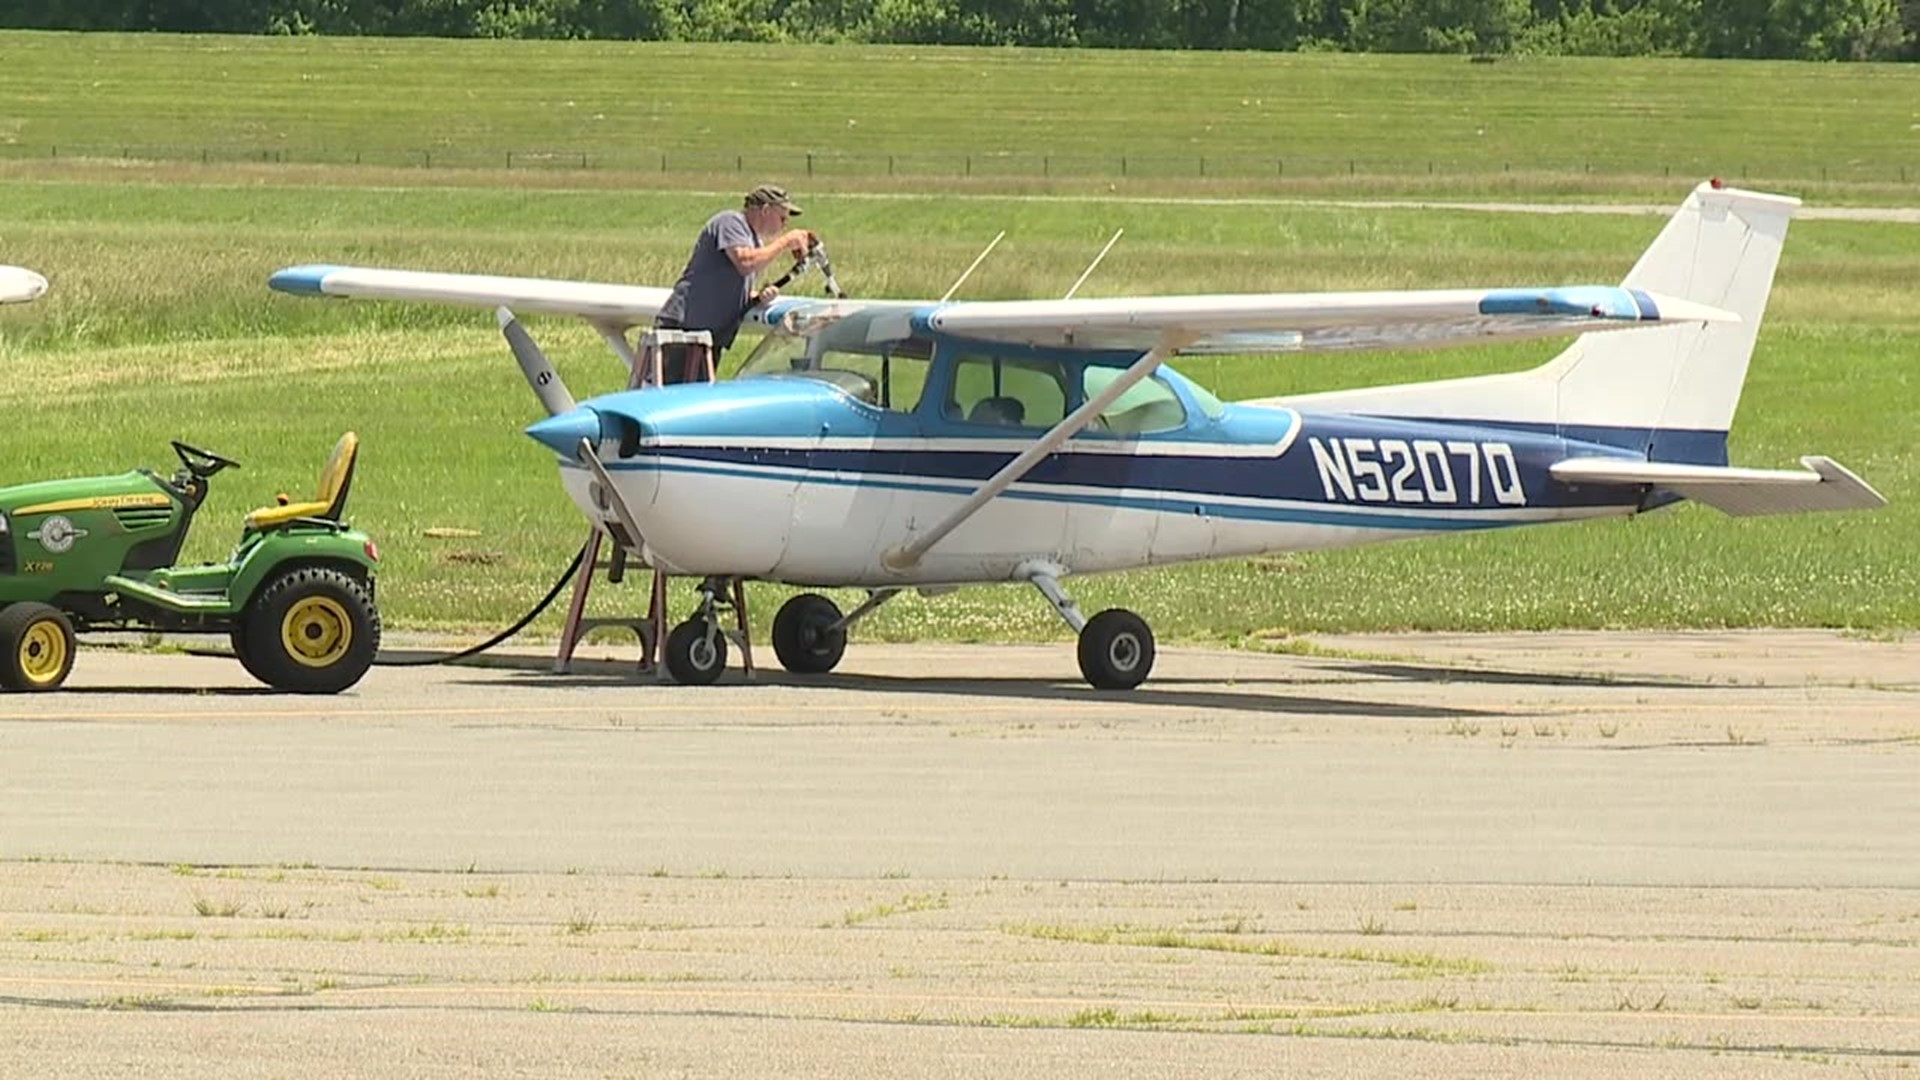 Pilots say fuel prices are impacting instruction and business.